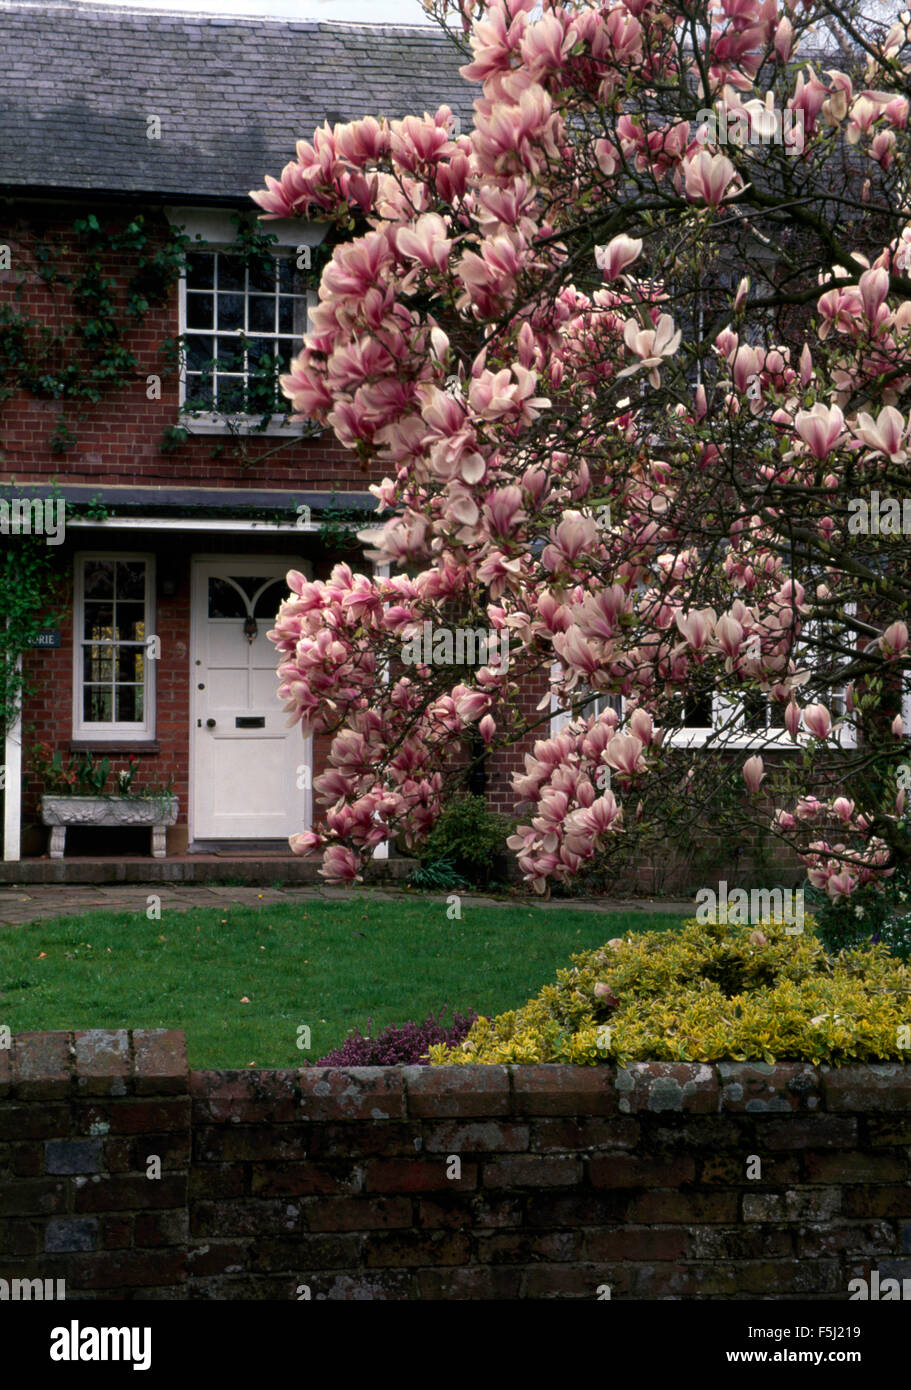 Magnolia Soulangiana growing in front garden of a traditional house Stock Photo